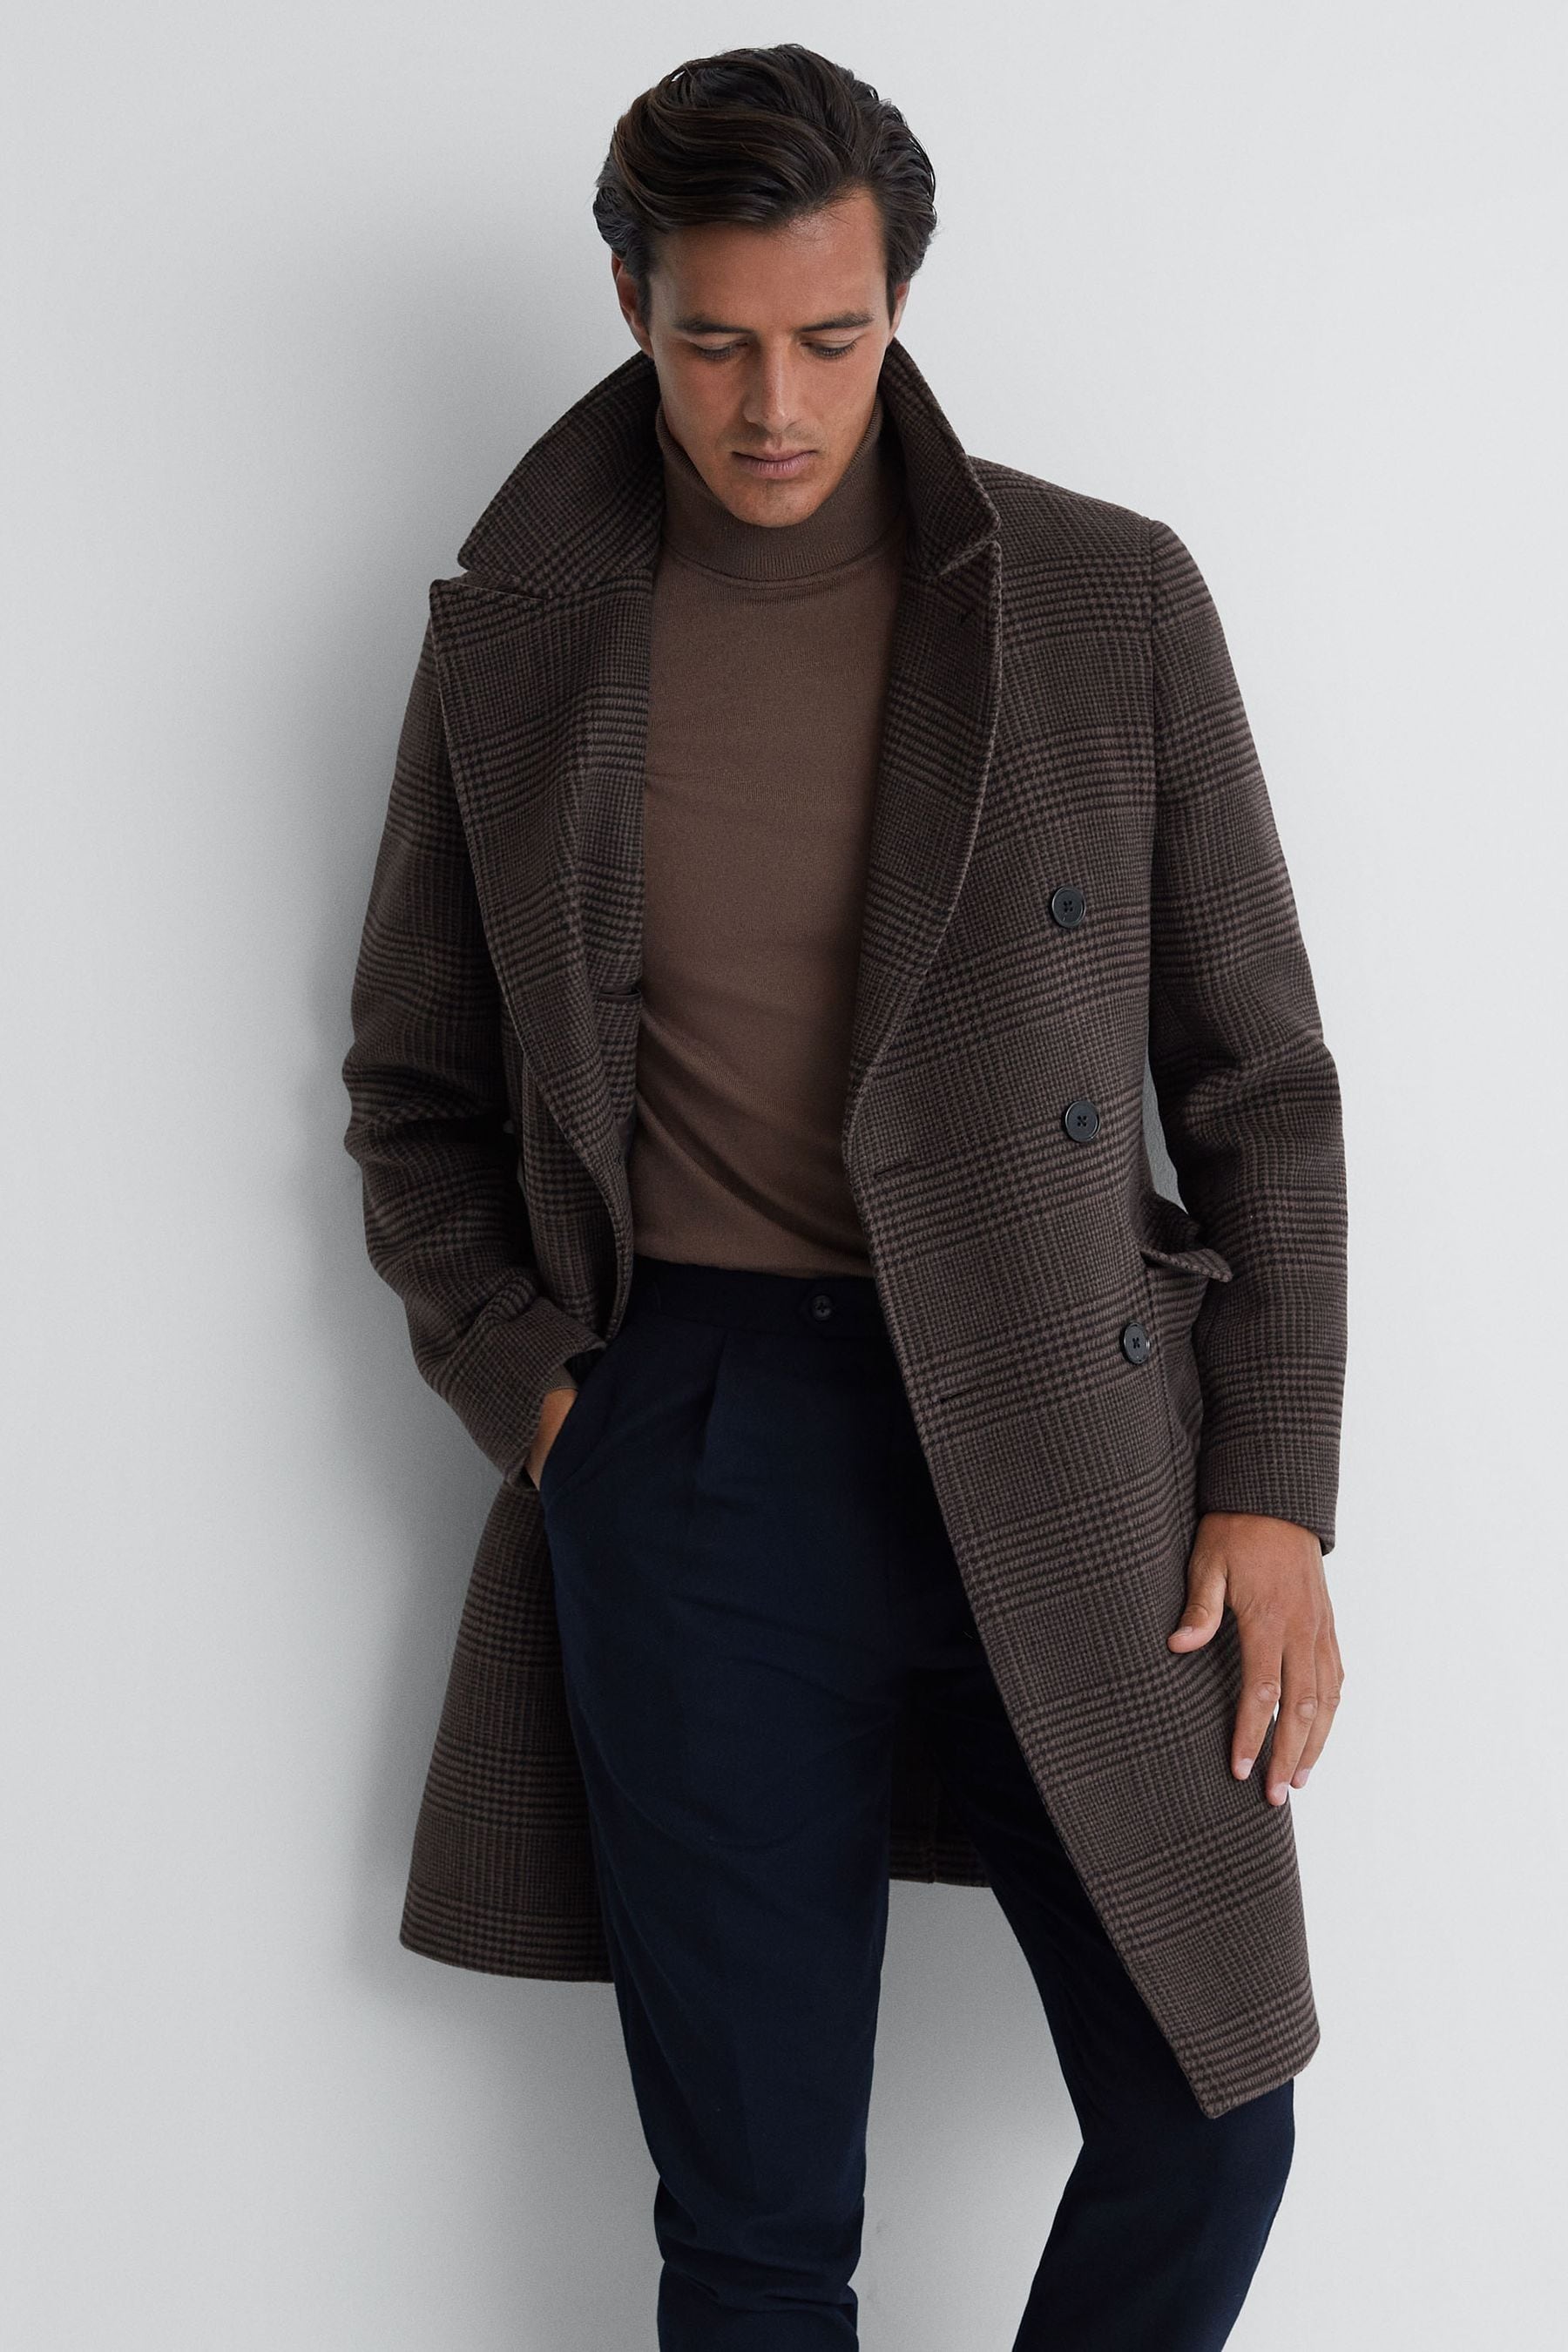 Reiss Date - Brown Wool Check Double Breasted Coat, S